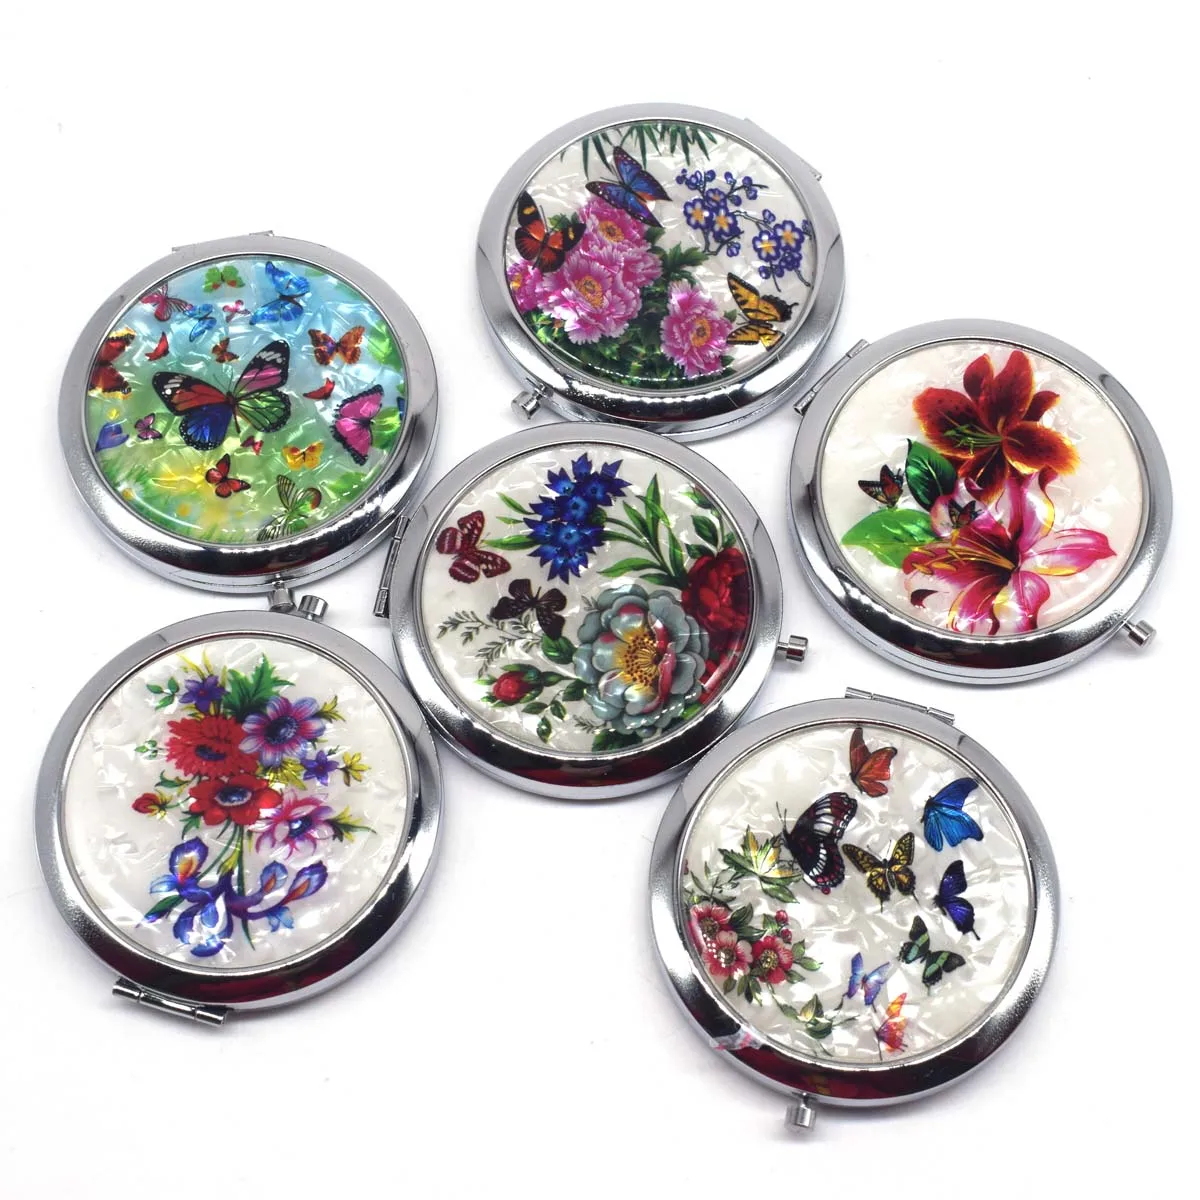 

HEALLOR Mini Makeup Compact Pocket Mirror Flower Butterfly Bamboo Metal Portable Two-side Folding Vintage Cosmetic s